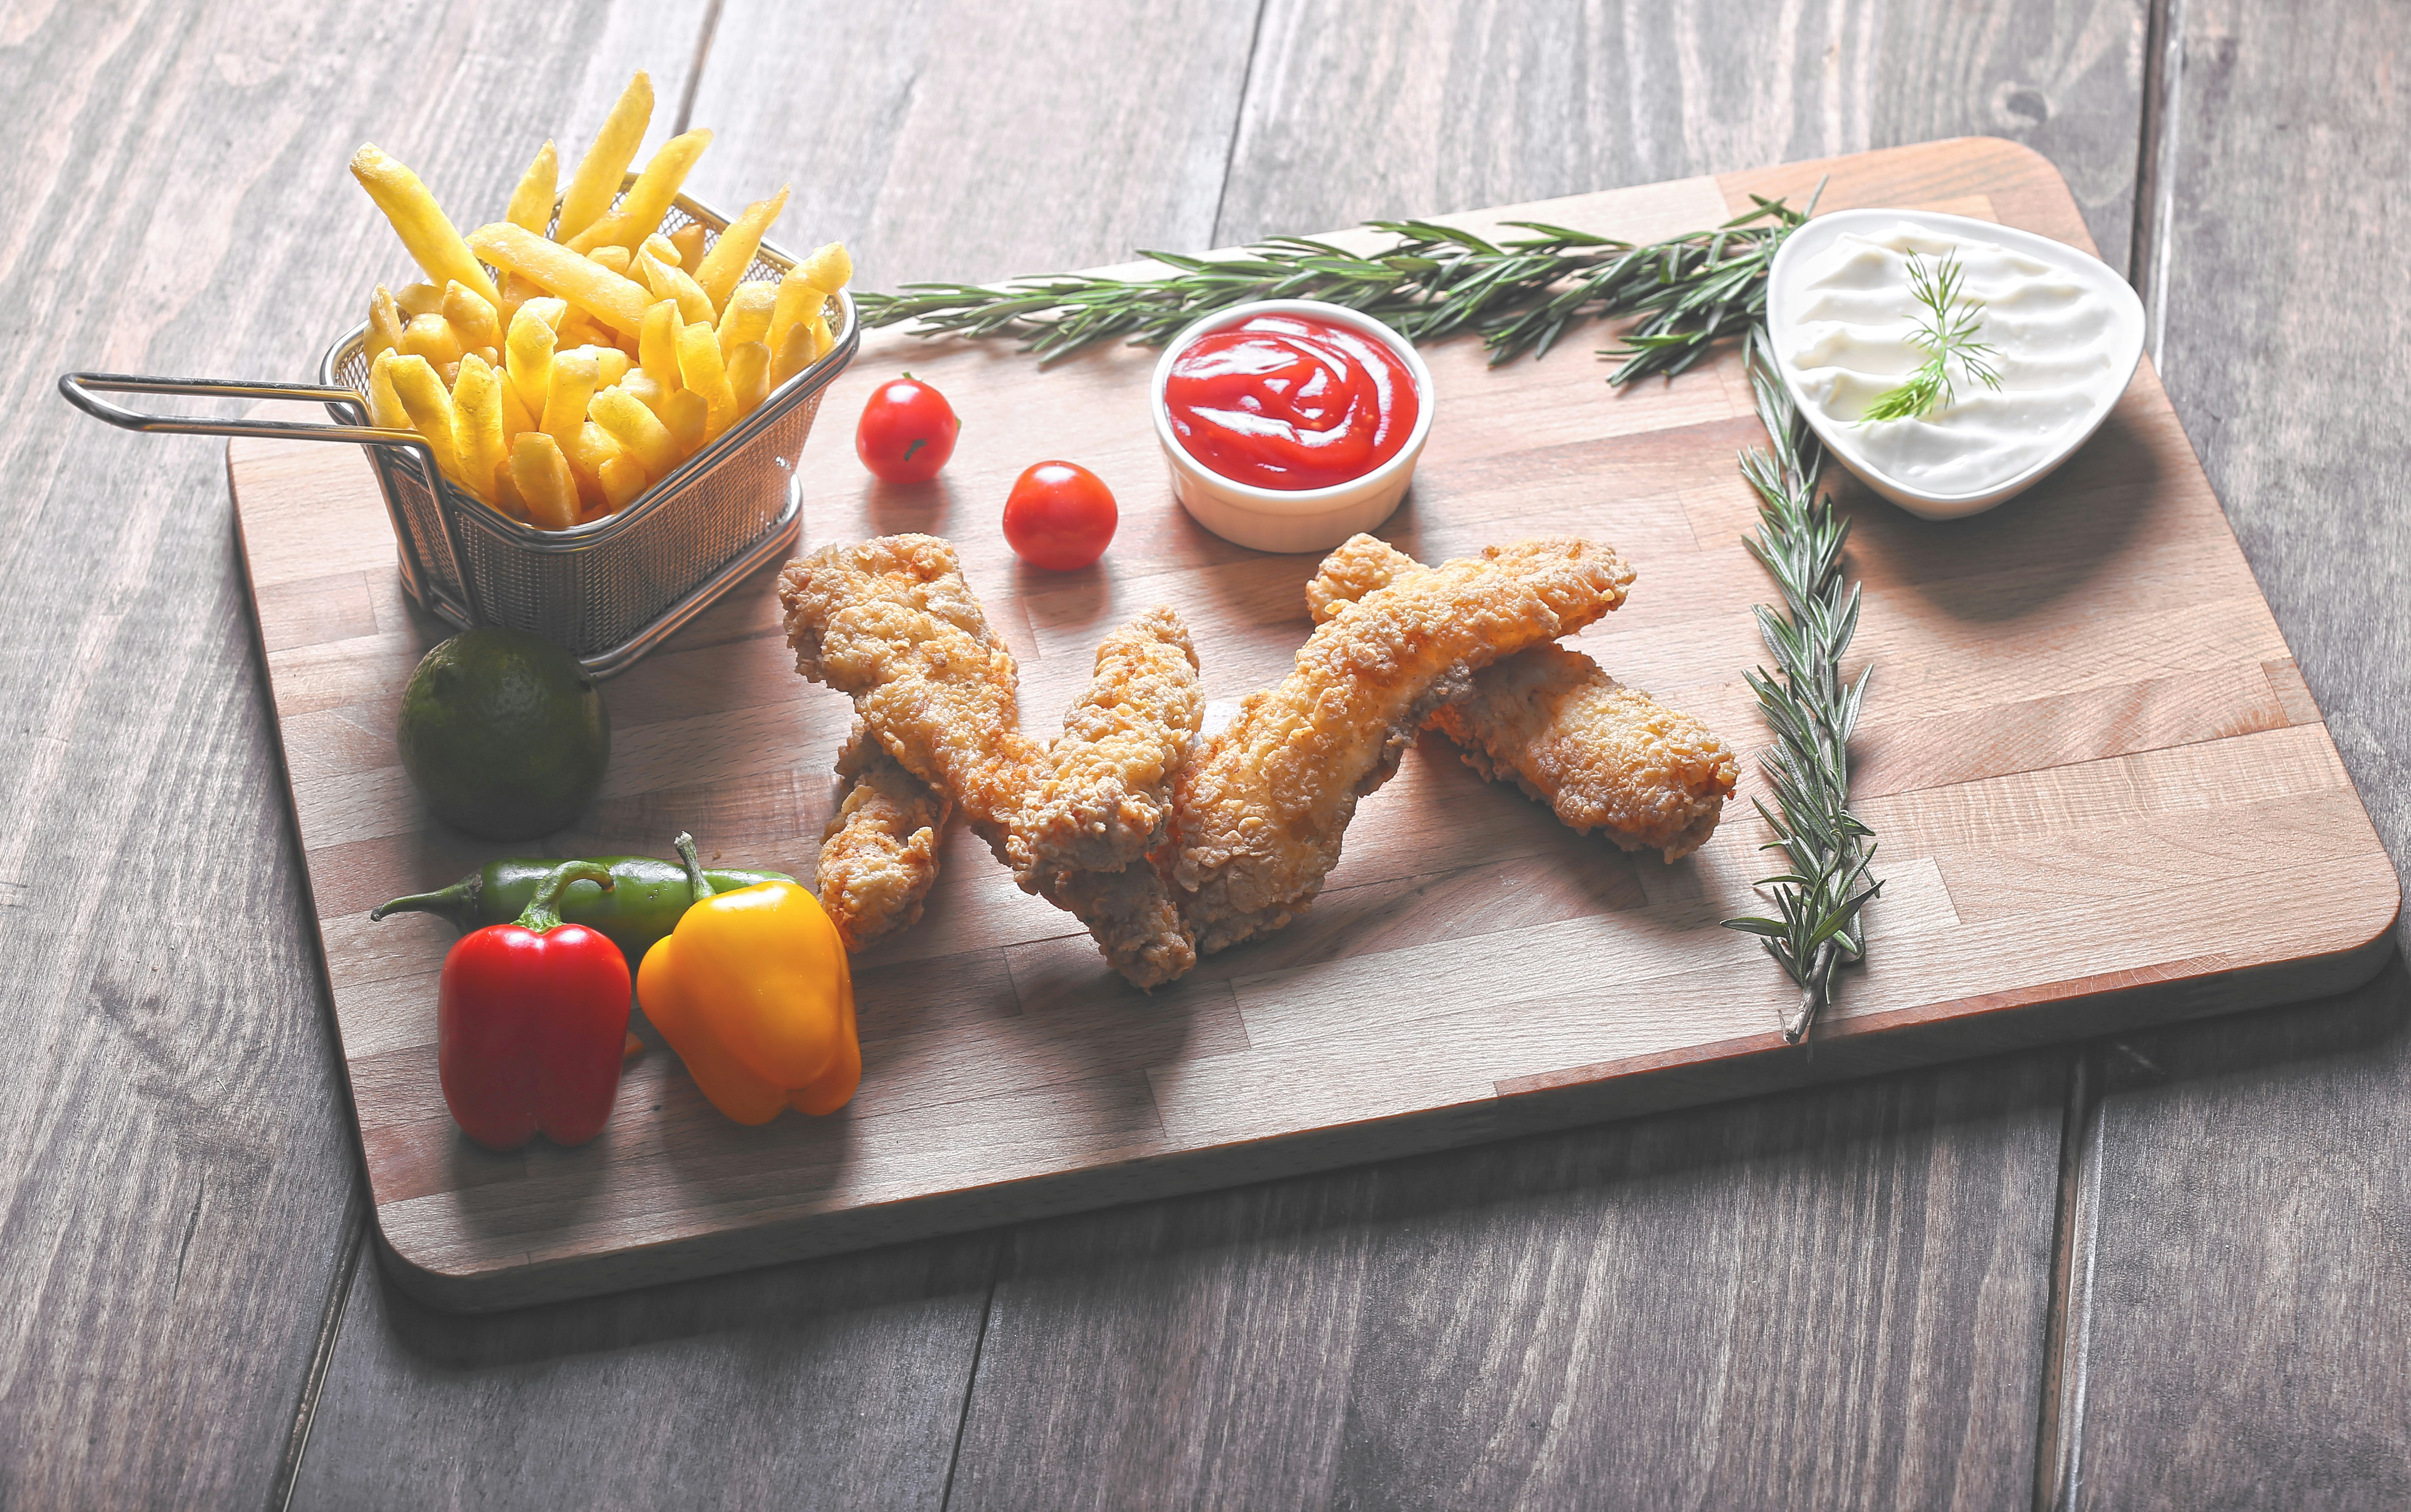 fried food beside fries and vegetables on chopping board